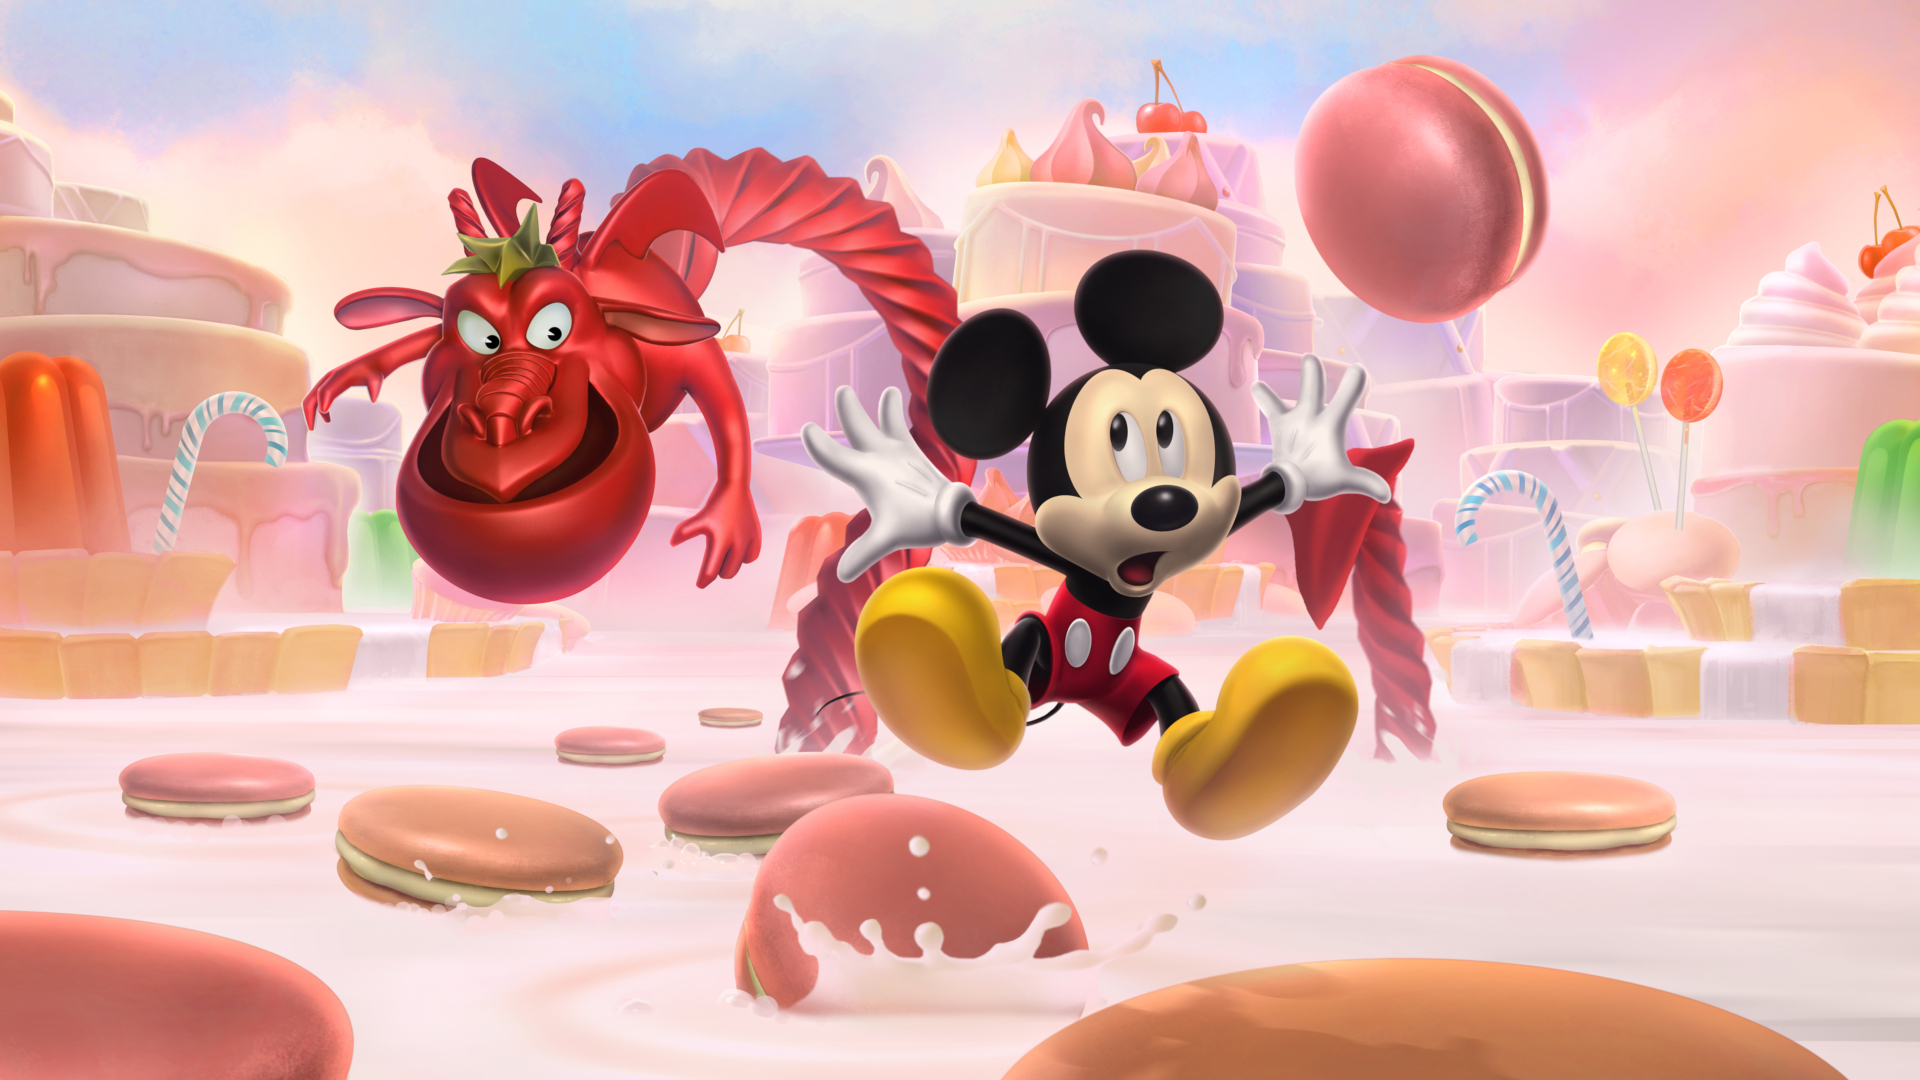 castle of illusion starring mickey mouse pc online